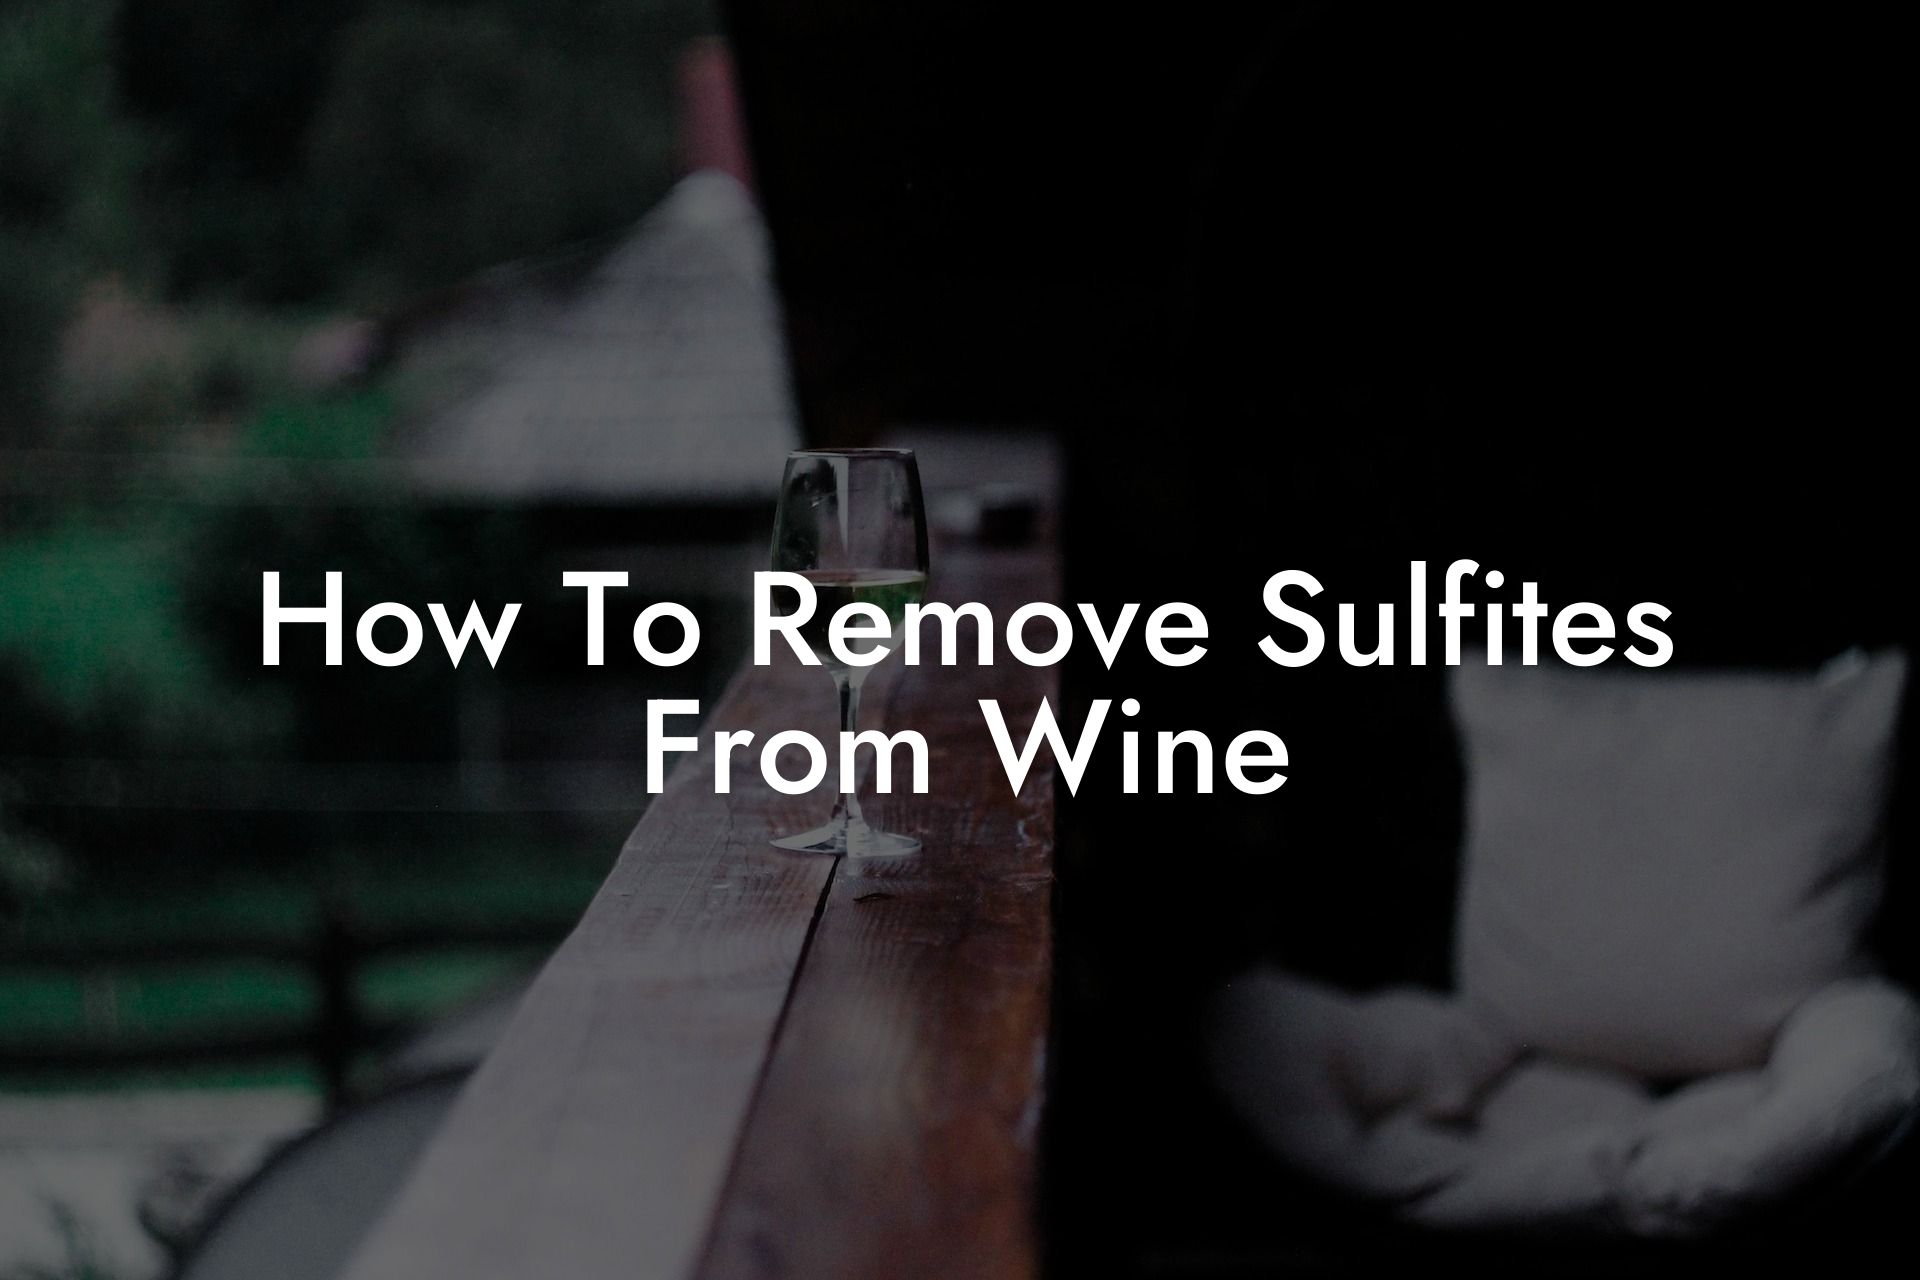 How To Remove Sulfites From Wine